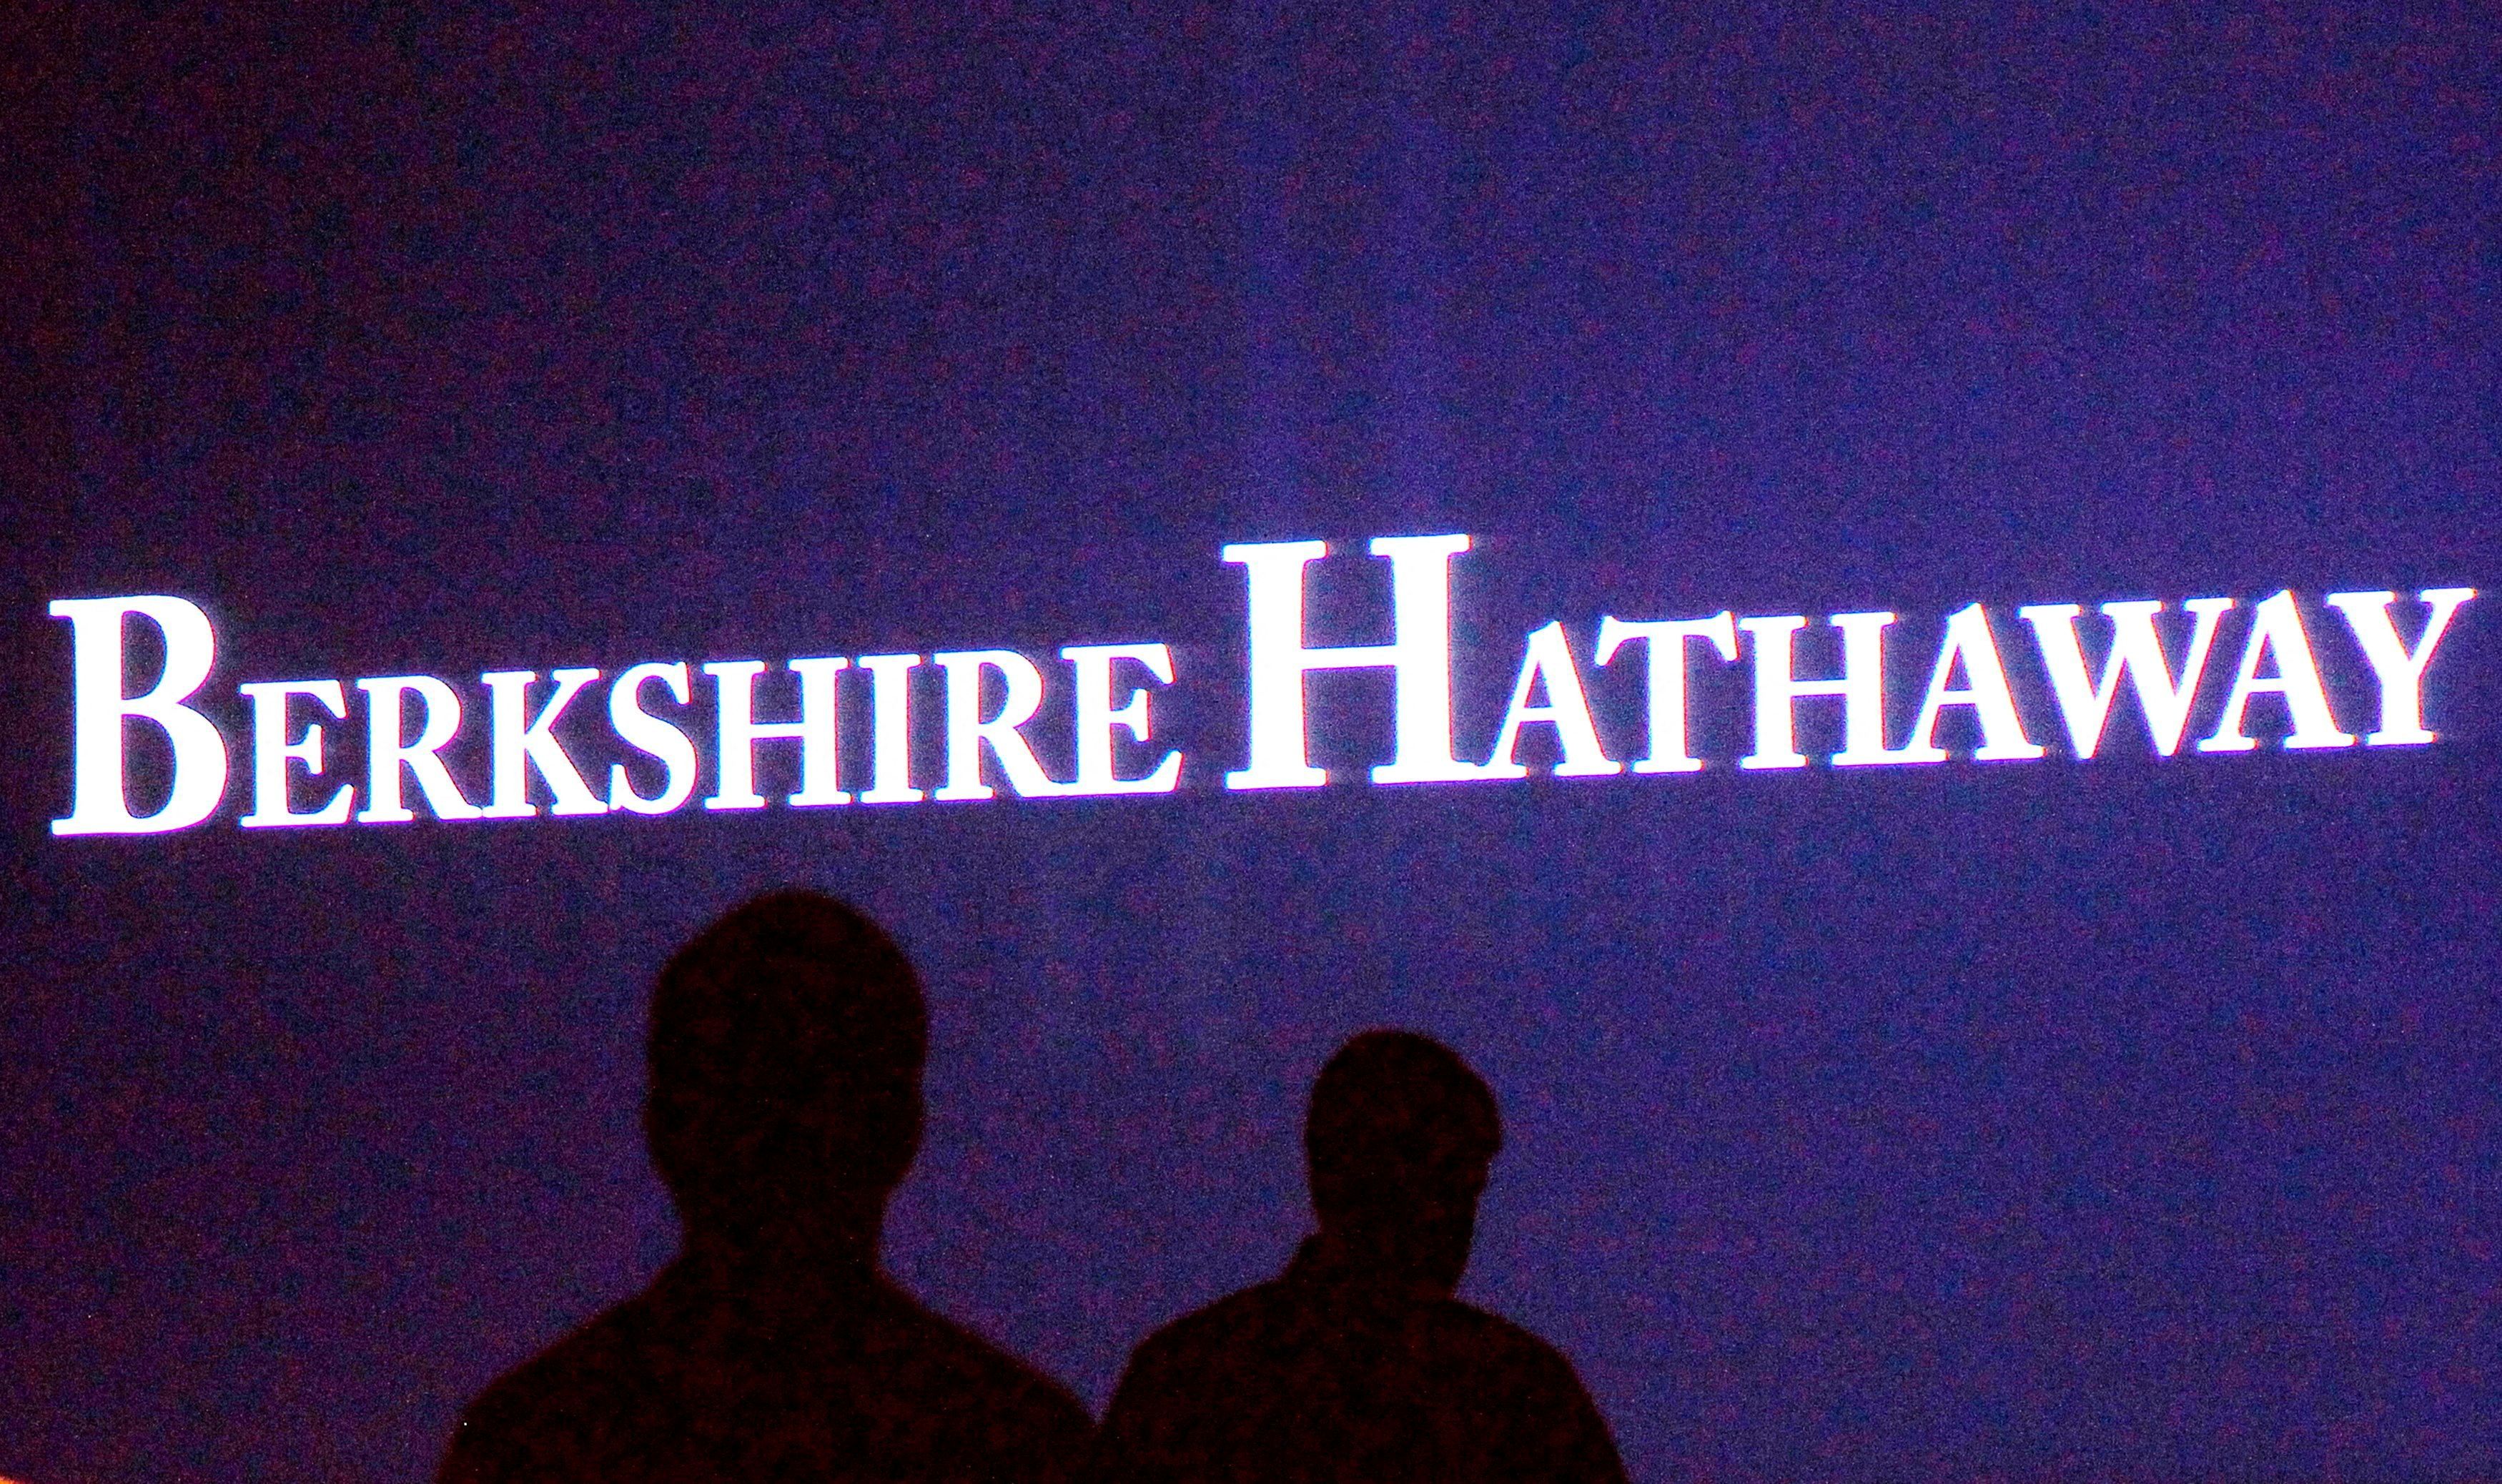 Berkshire Hathaway director Olson says Abel has the board's total